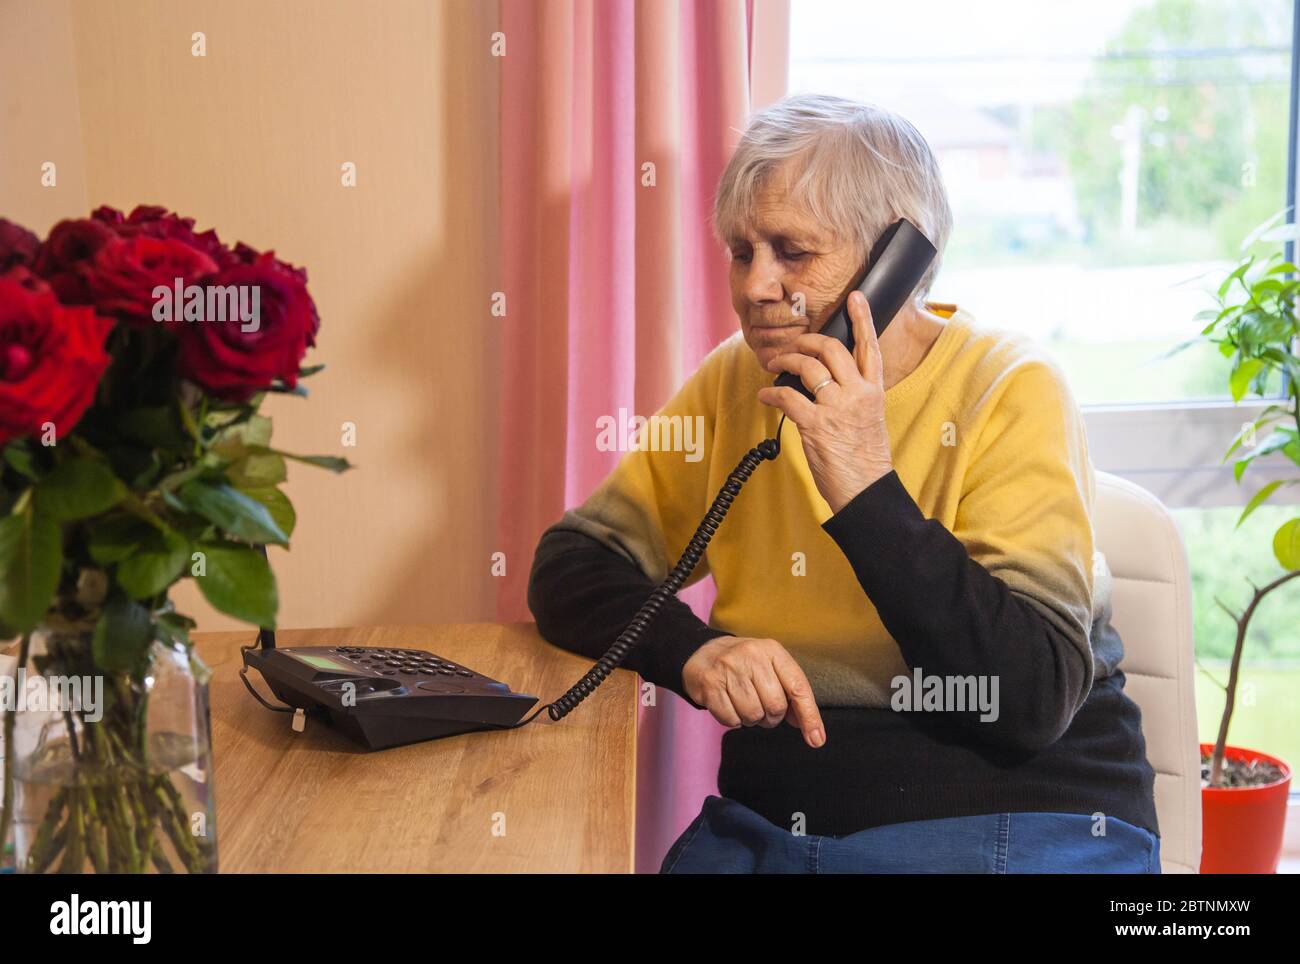 Grandmother is on the phone sitting in a chair in a cozy room with flowers Stock Photo